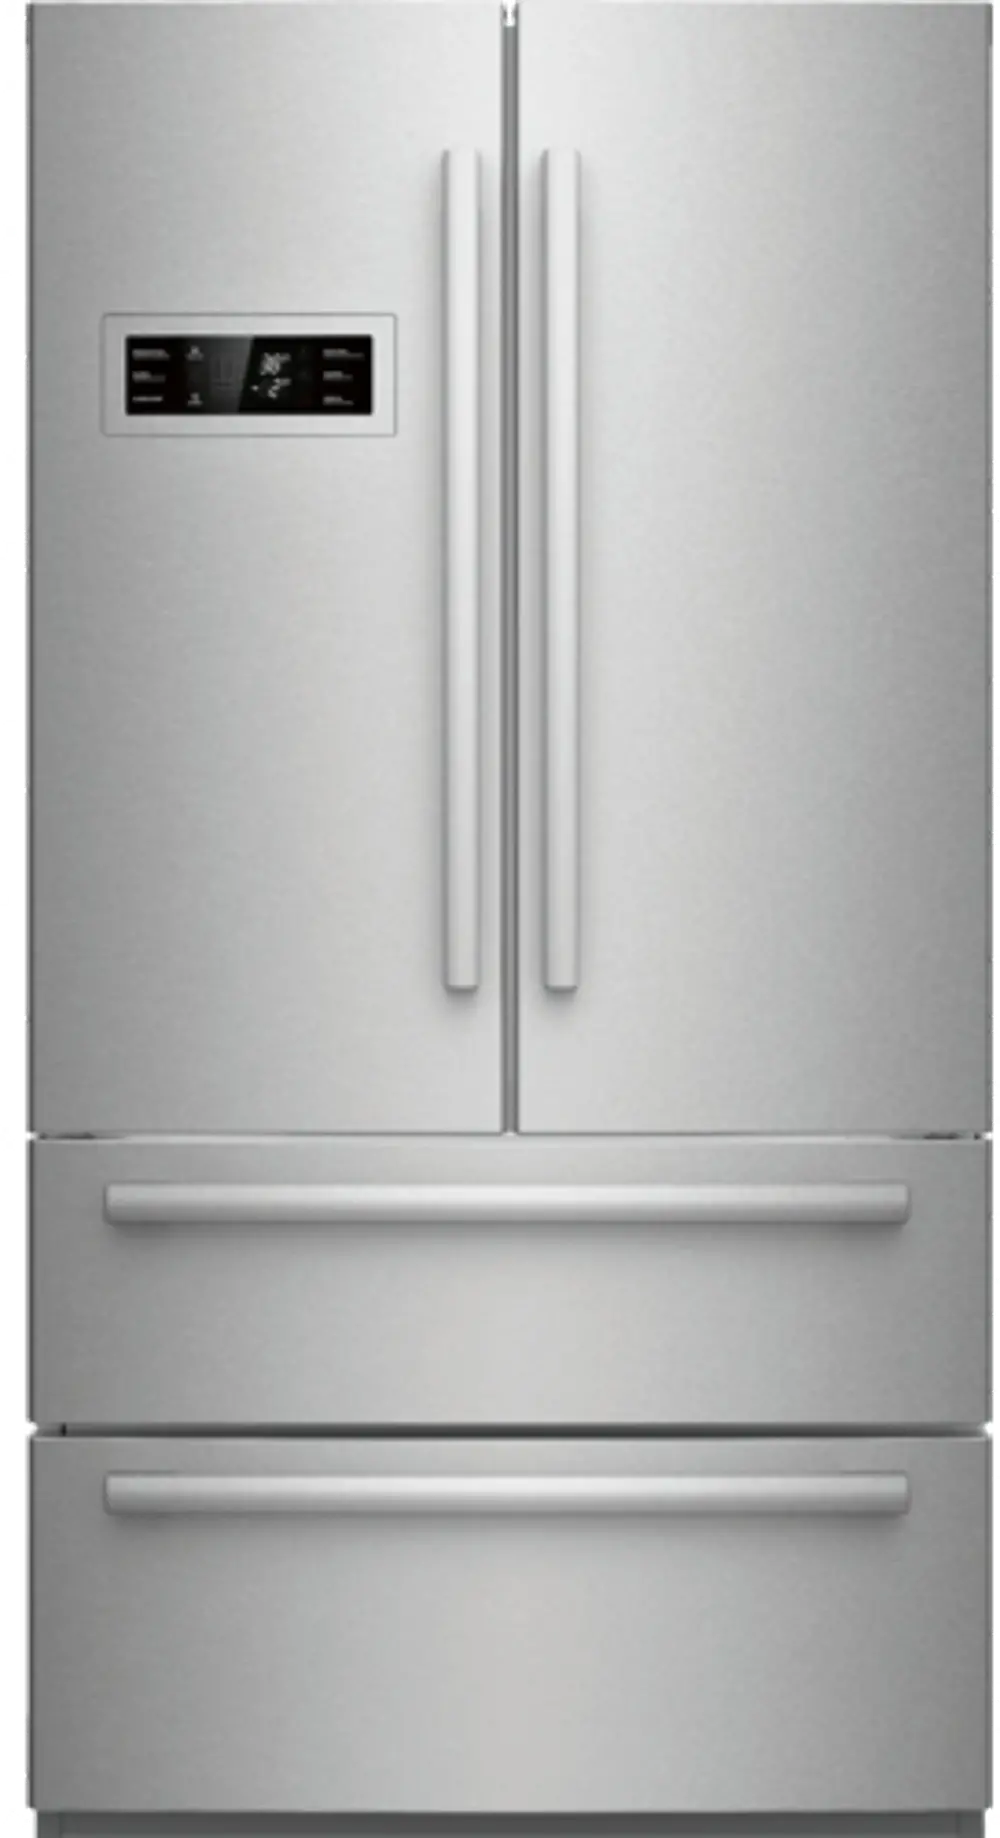 B21CL80SNS Bosch Stainless Steel French Door Refrigerator - 36 Inch-1